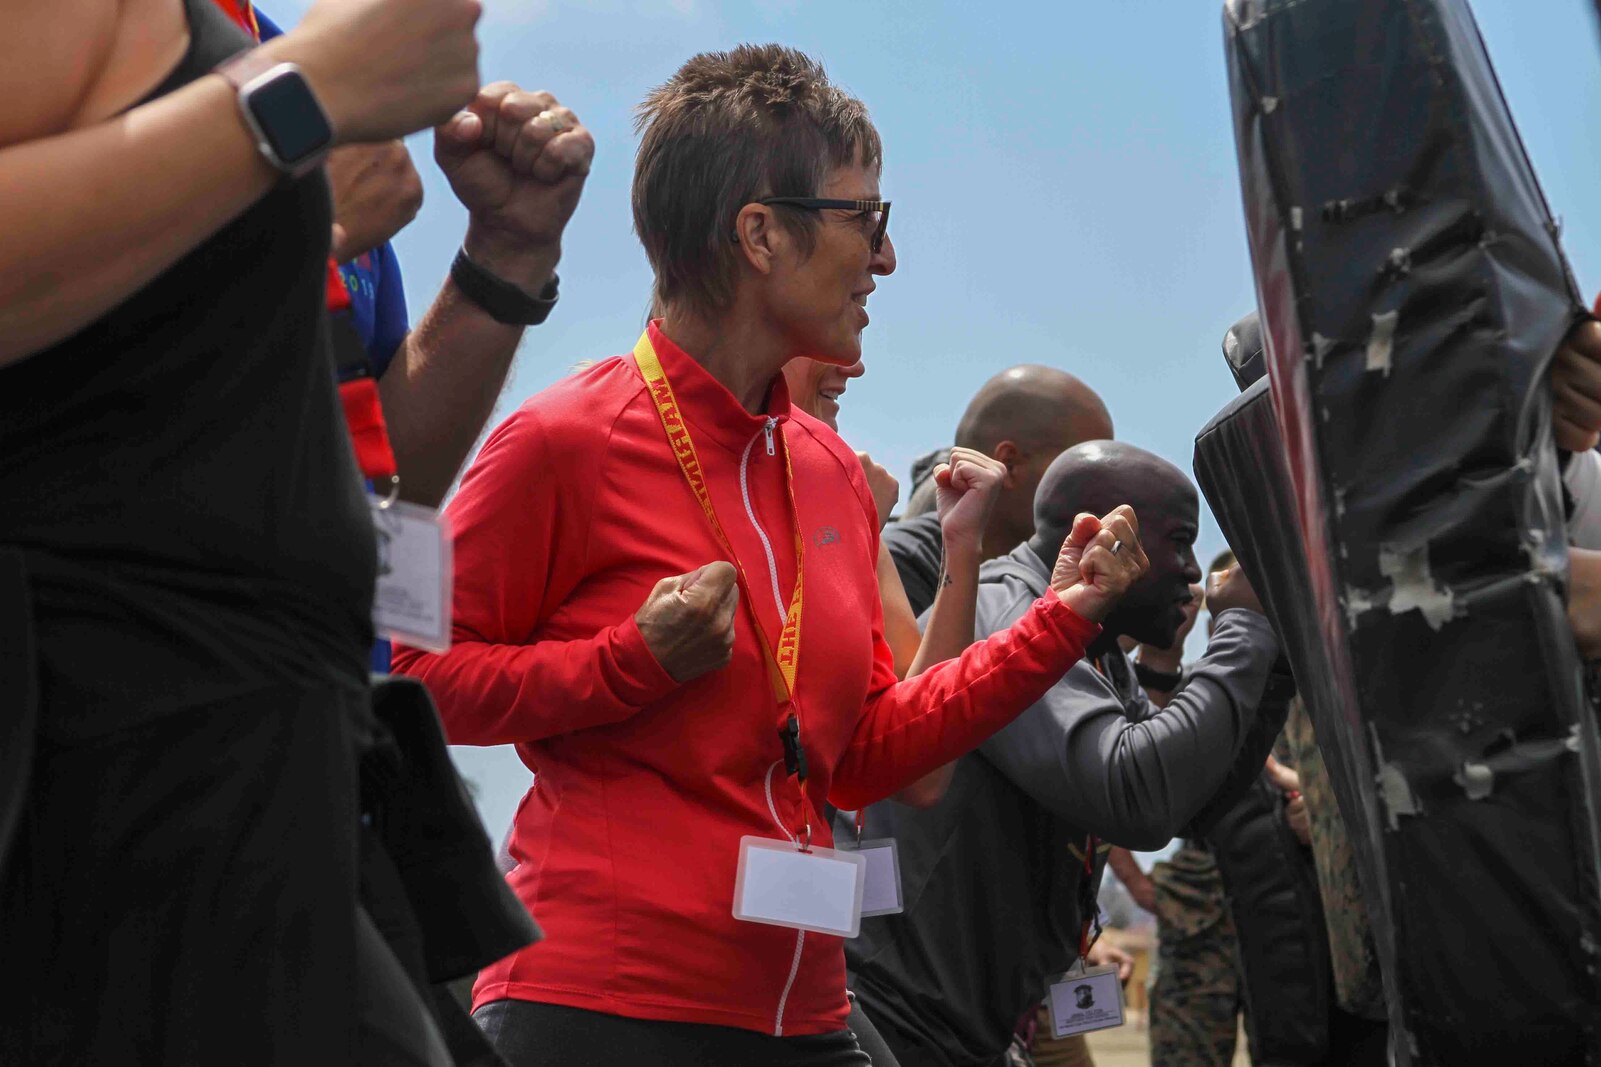 Janet Bonovich, a teacher at Temescal Canyon High School, prepares to perform different Marine Corps Martial Arts techniques as part of the Educators Workshop at Marine Corps Recruit Depot San Diego, California, June 18, 2019. The mission of the Educators Workshop is to inform, demonstrate and build relationships while providing educators and community influencers with firsthand knowledge of the Marine Corps recruiting process, entry level training, job opportunities and educational benefits available to Marines. (U.S. Marine Corps photo by Sgt. Bernadette Plouffe)